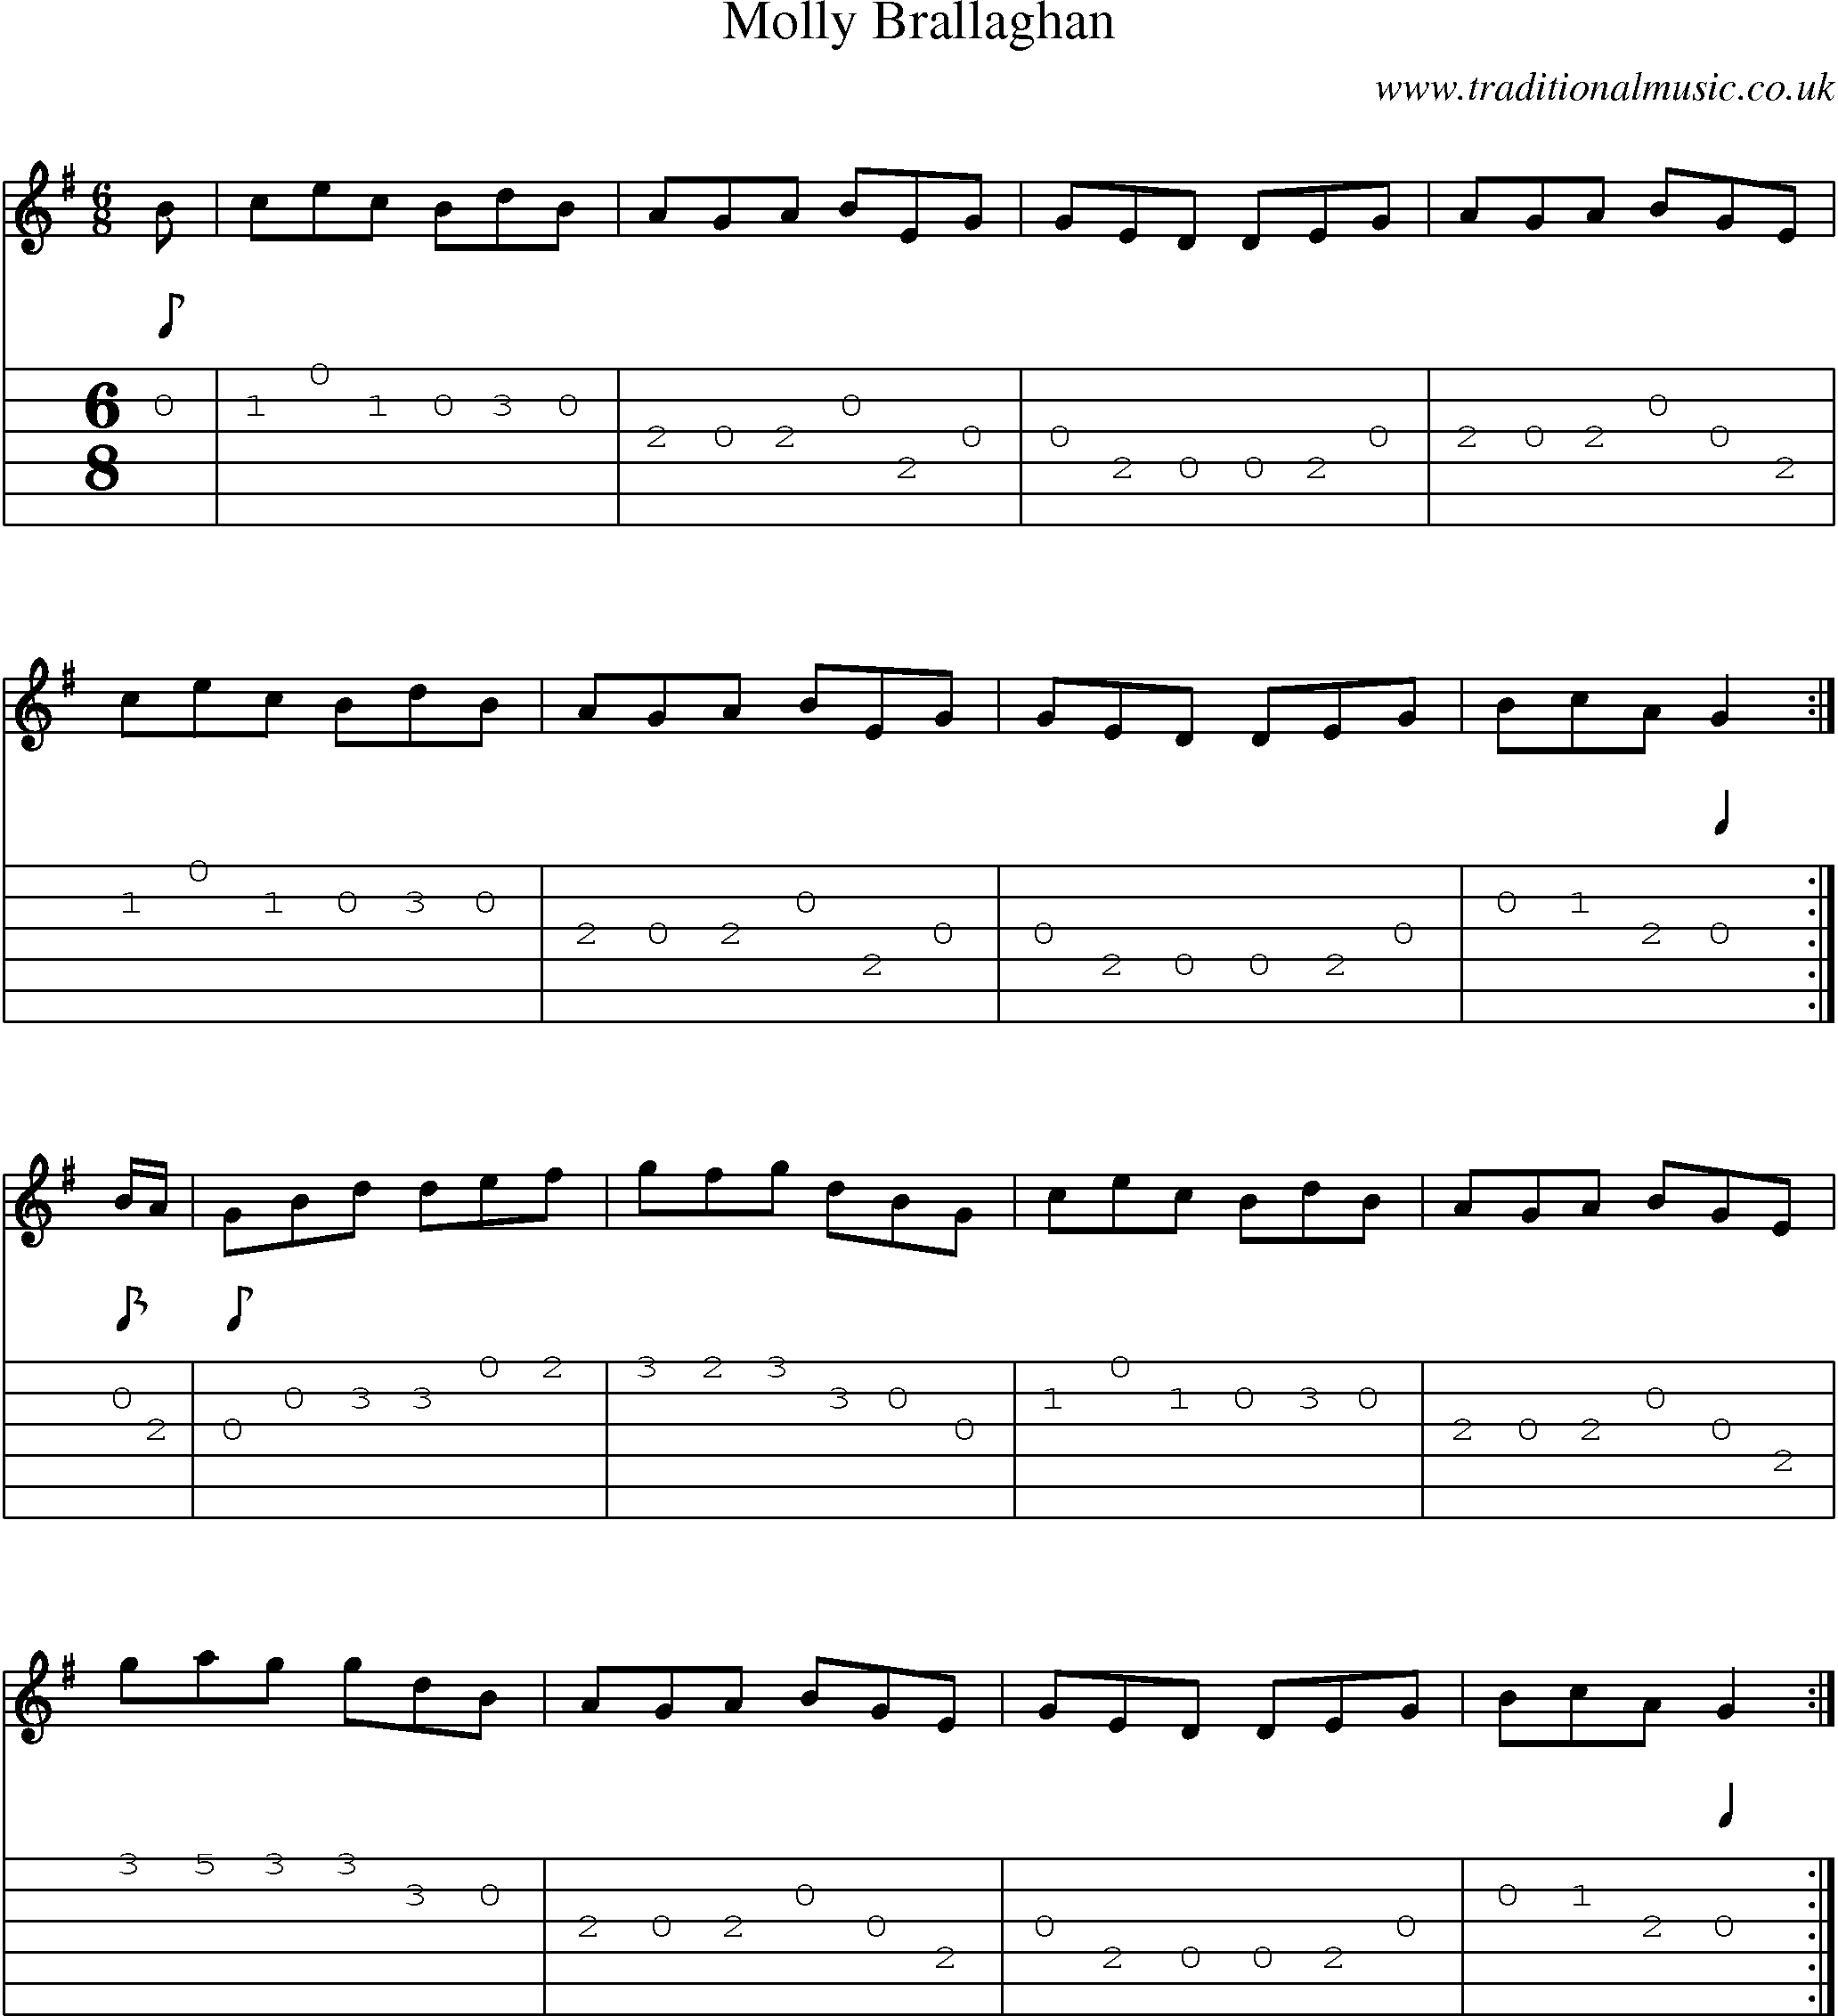 Music Score and Guitar Tabs for Molly Brallaghan